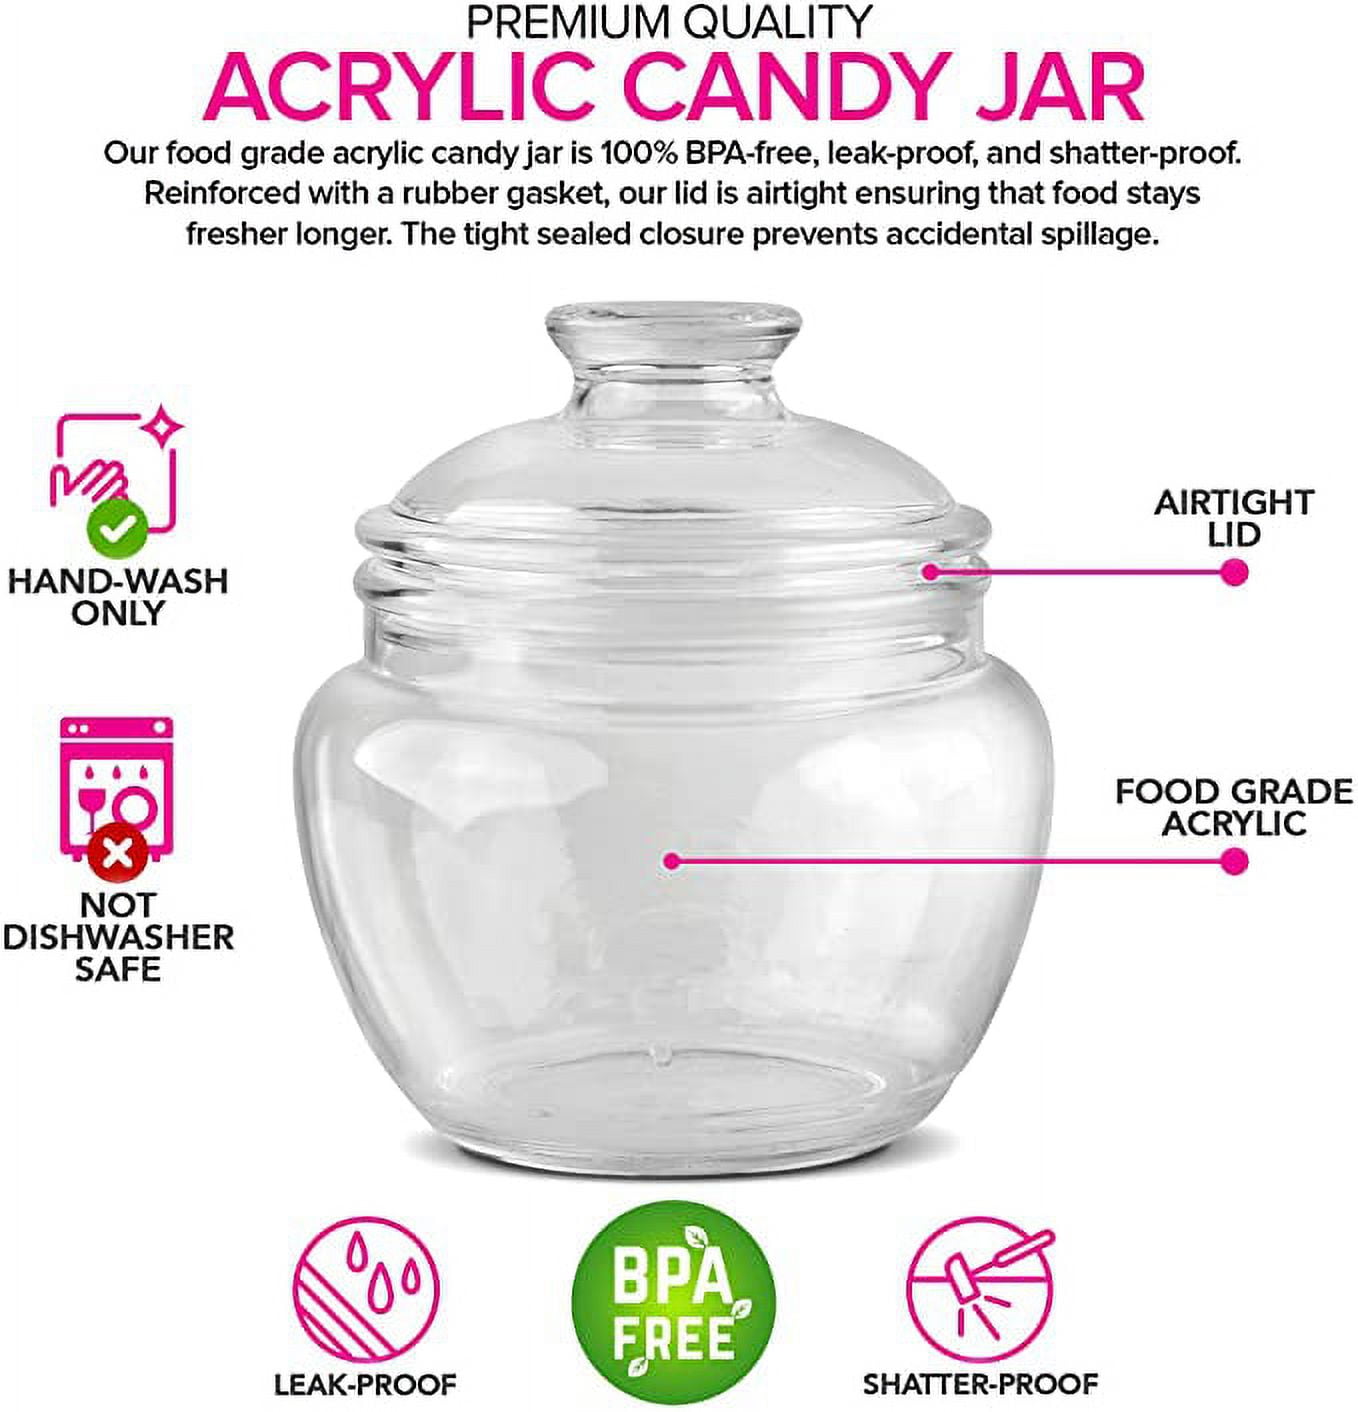 Vinkoe Kitchen Cookie Jar, Clear Acrylic Airtight Jar for Nuts, Cookies,  Candy, Chocolate, 40 OZ